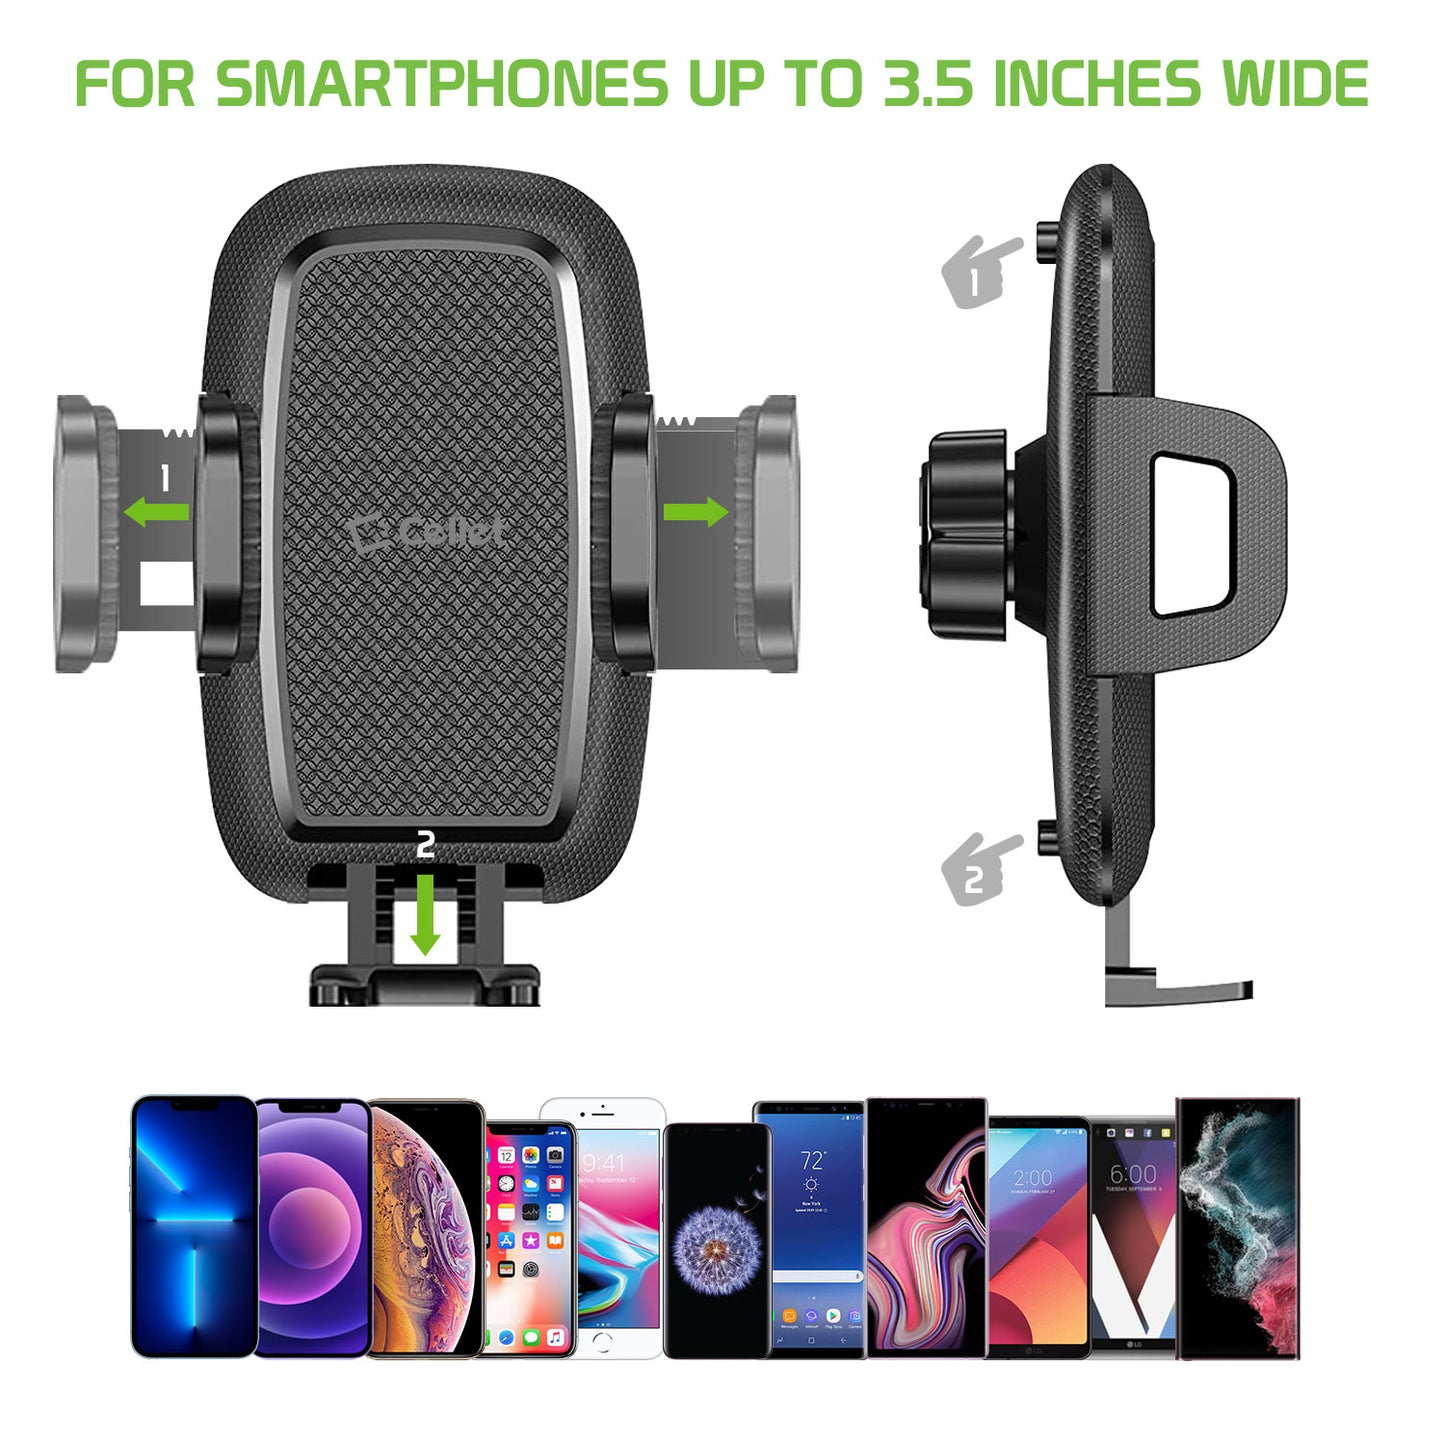 PH160 - Cup Holder Mount W/ 2 Cradles 1 for smartphone, and 1 for Tablet